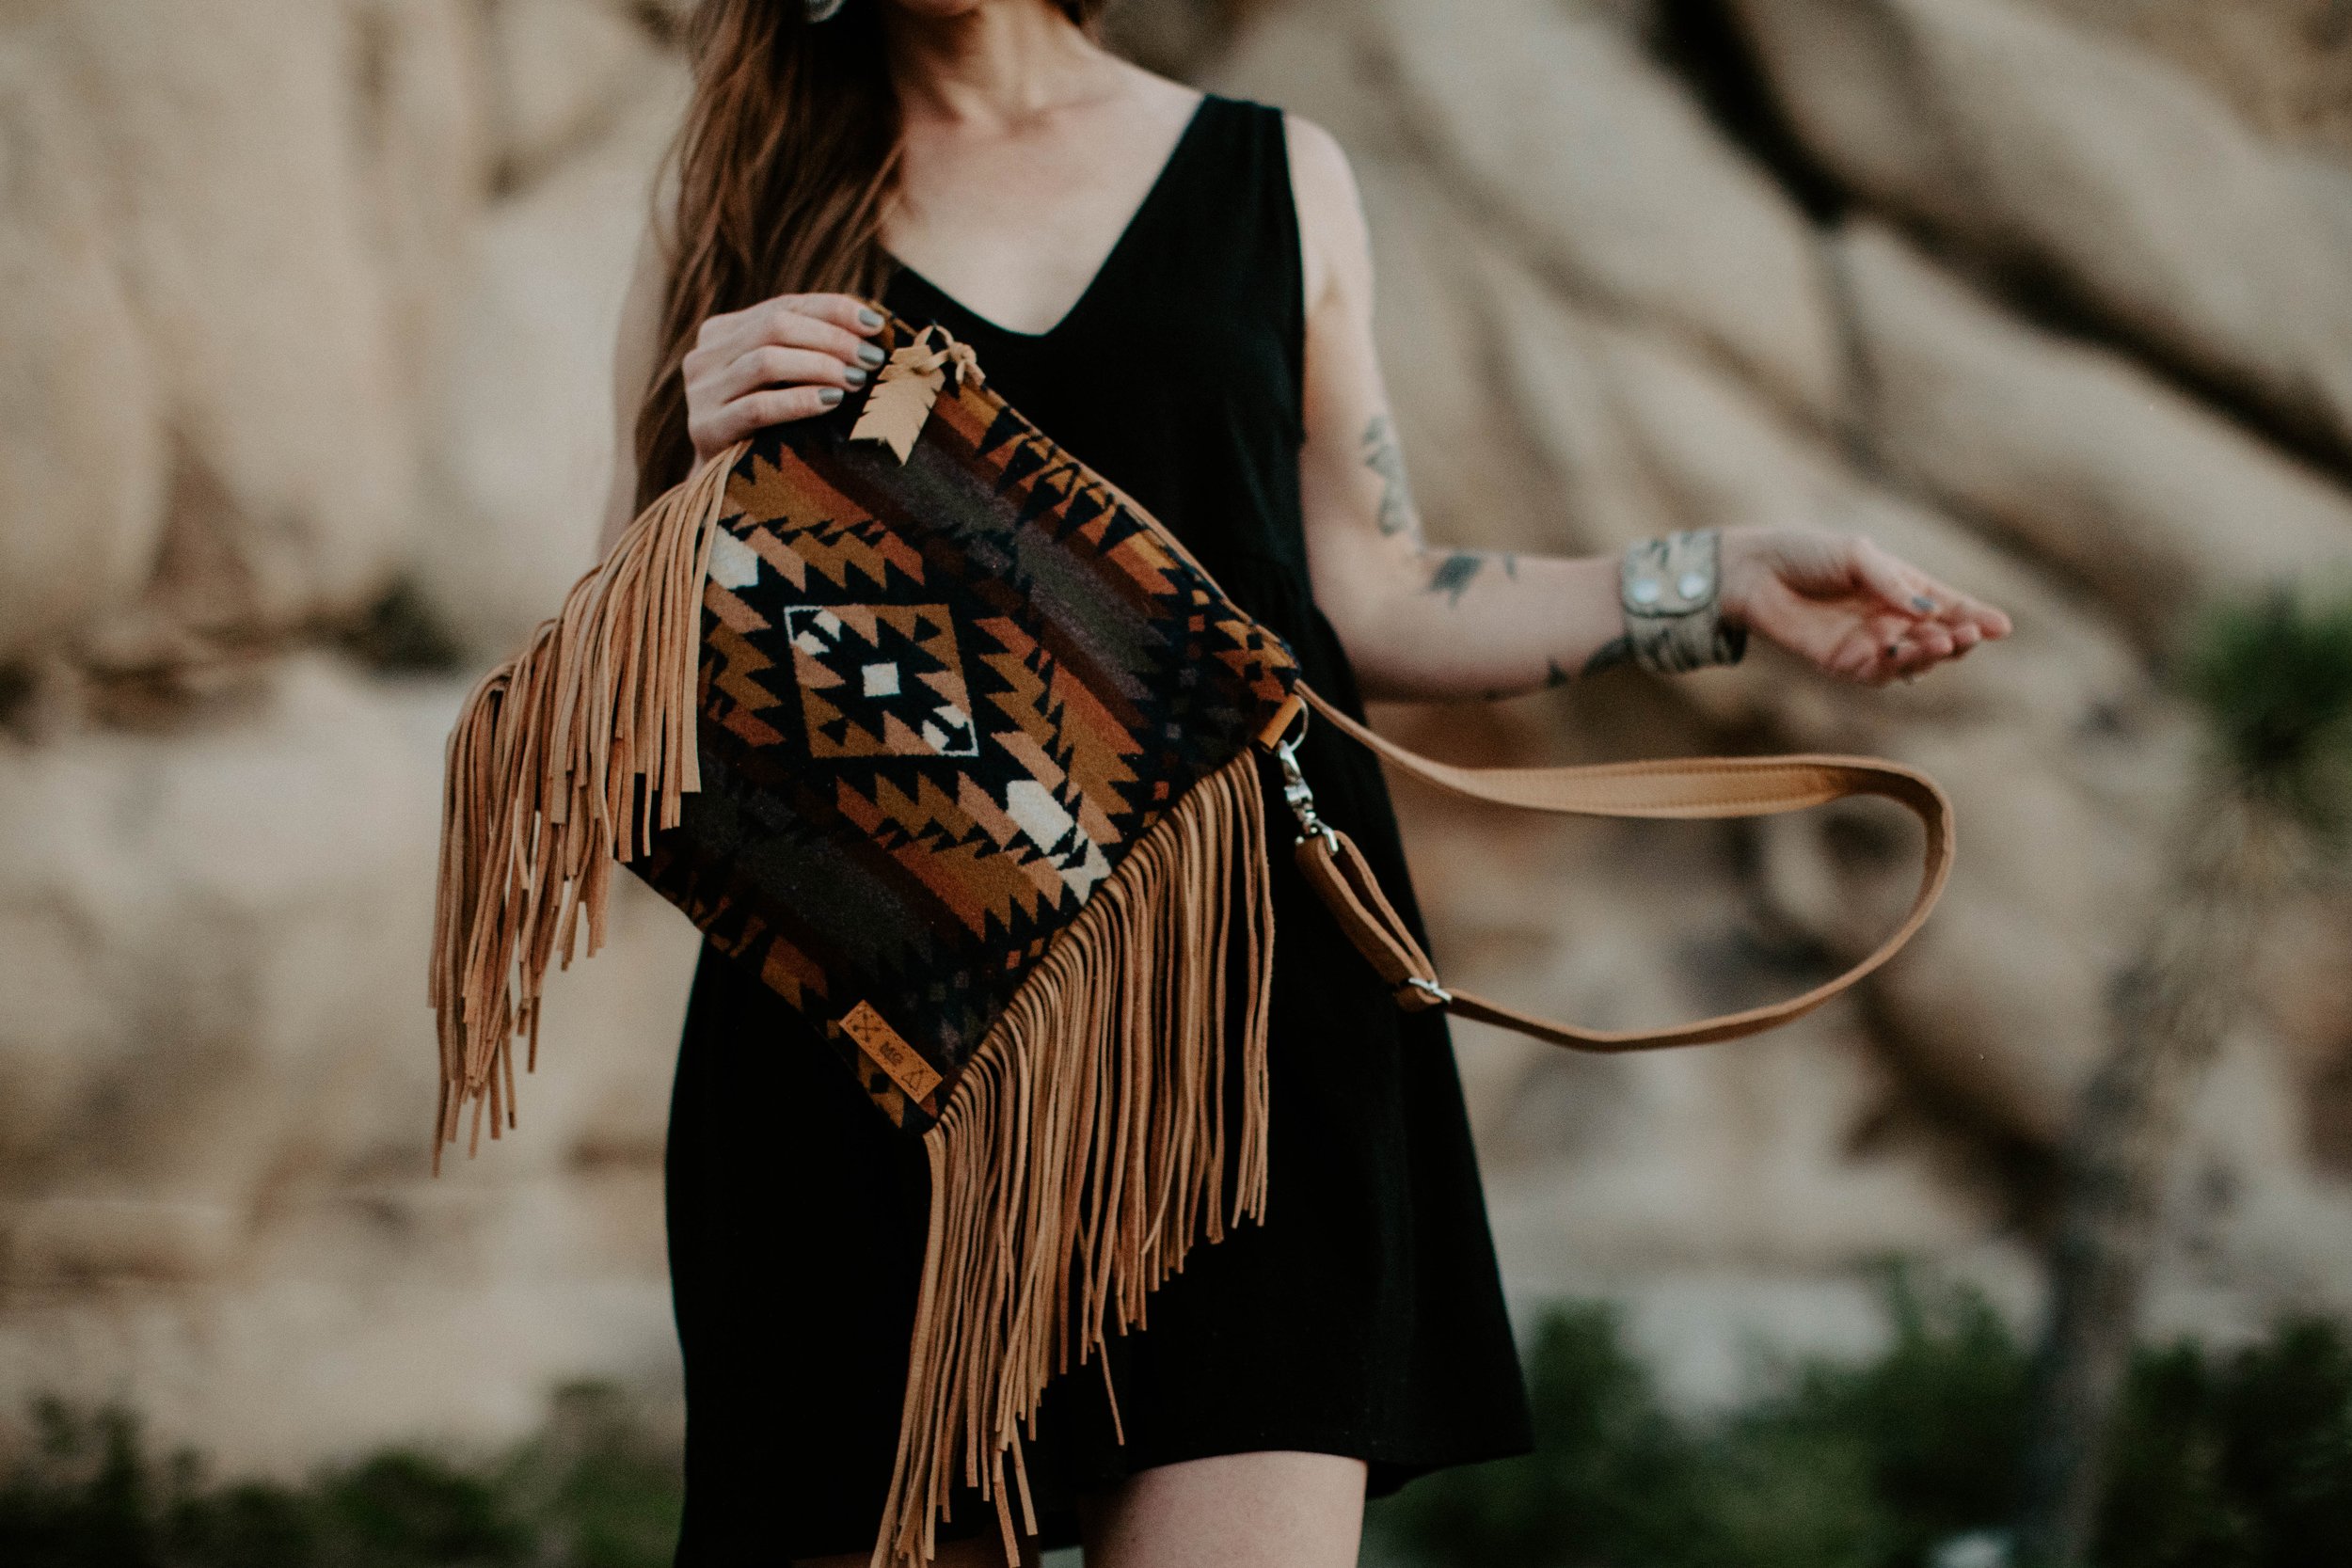 Western Dream Fringe Purse - Concealed Carry – Chestnut Cowgirl